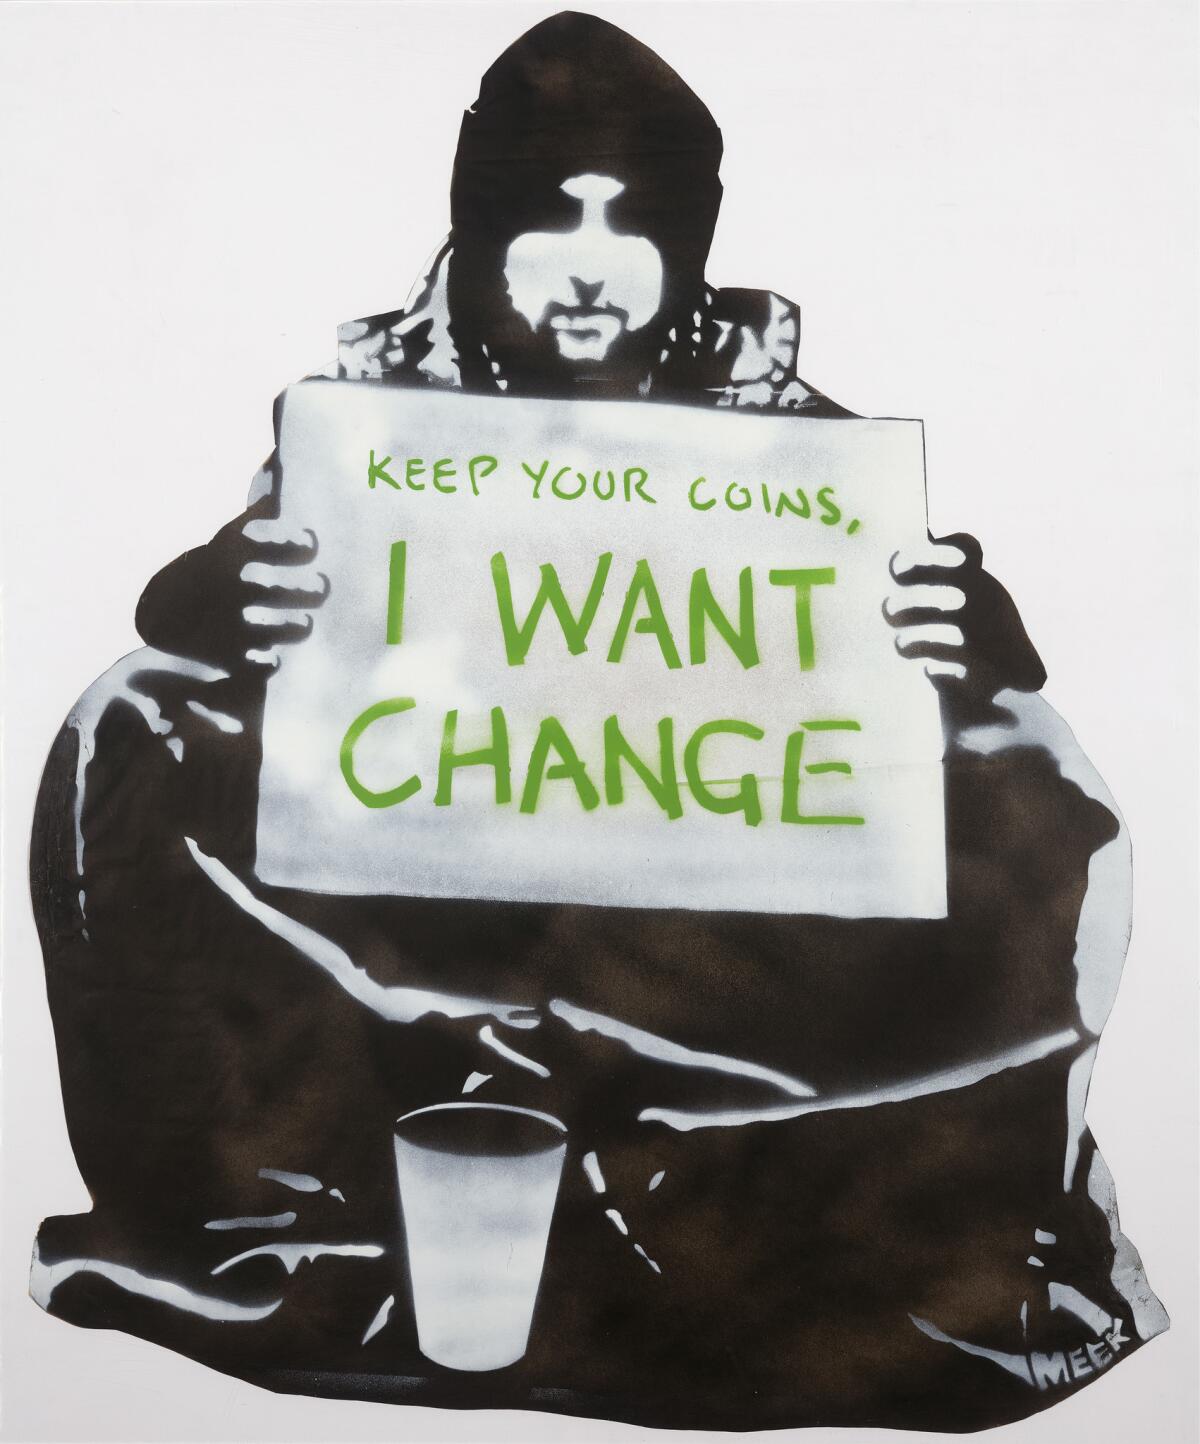 "Begging for Change," Meek, stencil, 2004, Melbourne, Australia. (Center for the Study of Political Graphics)